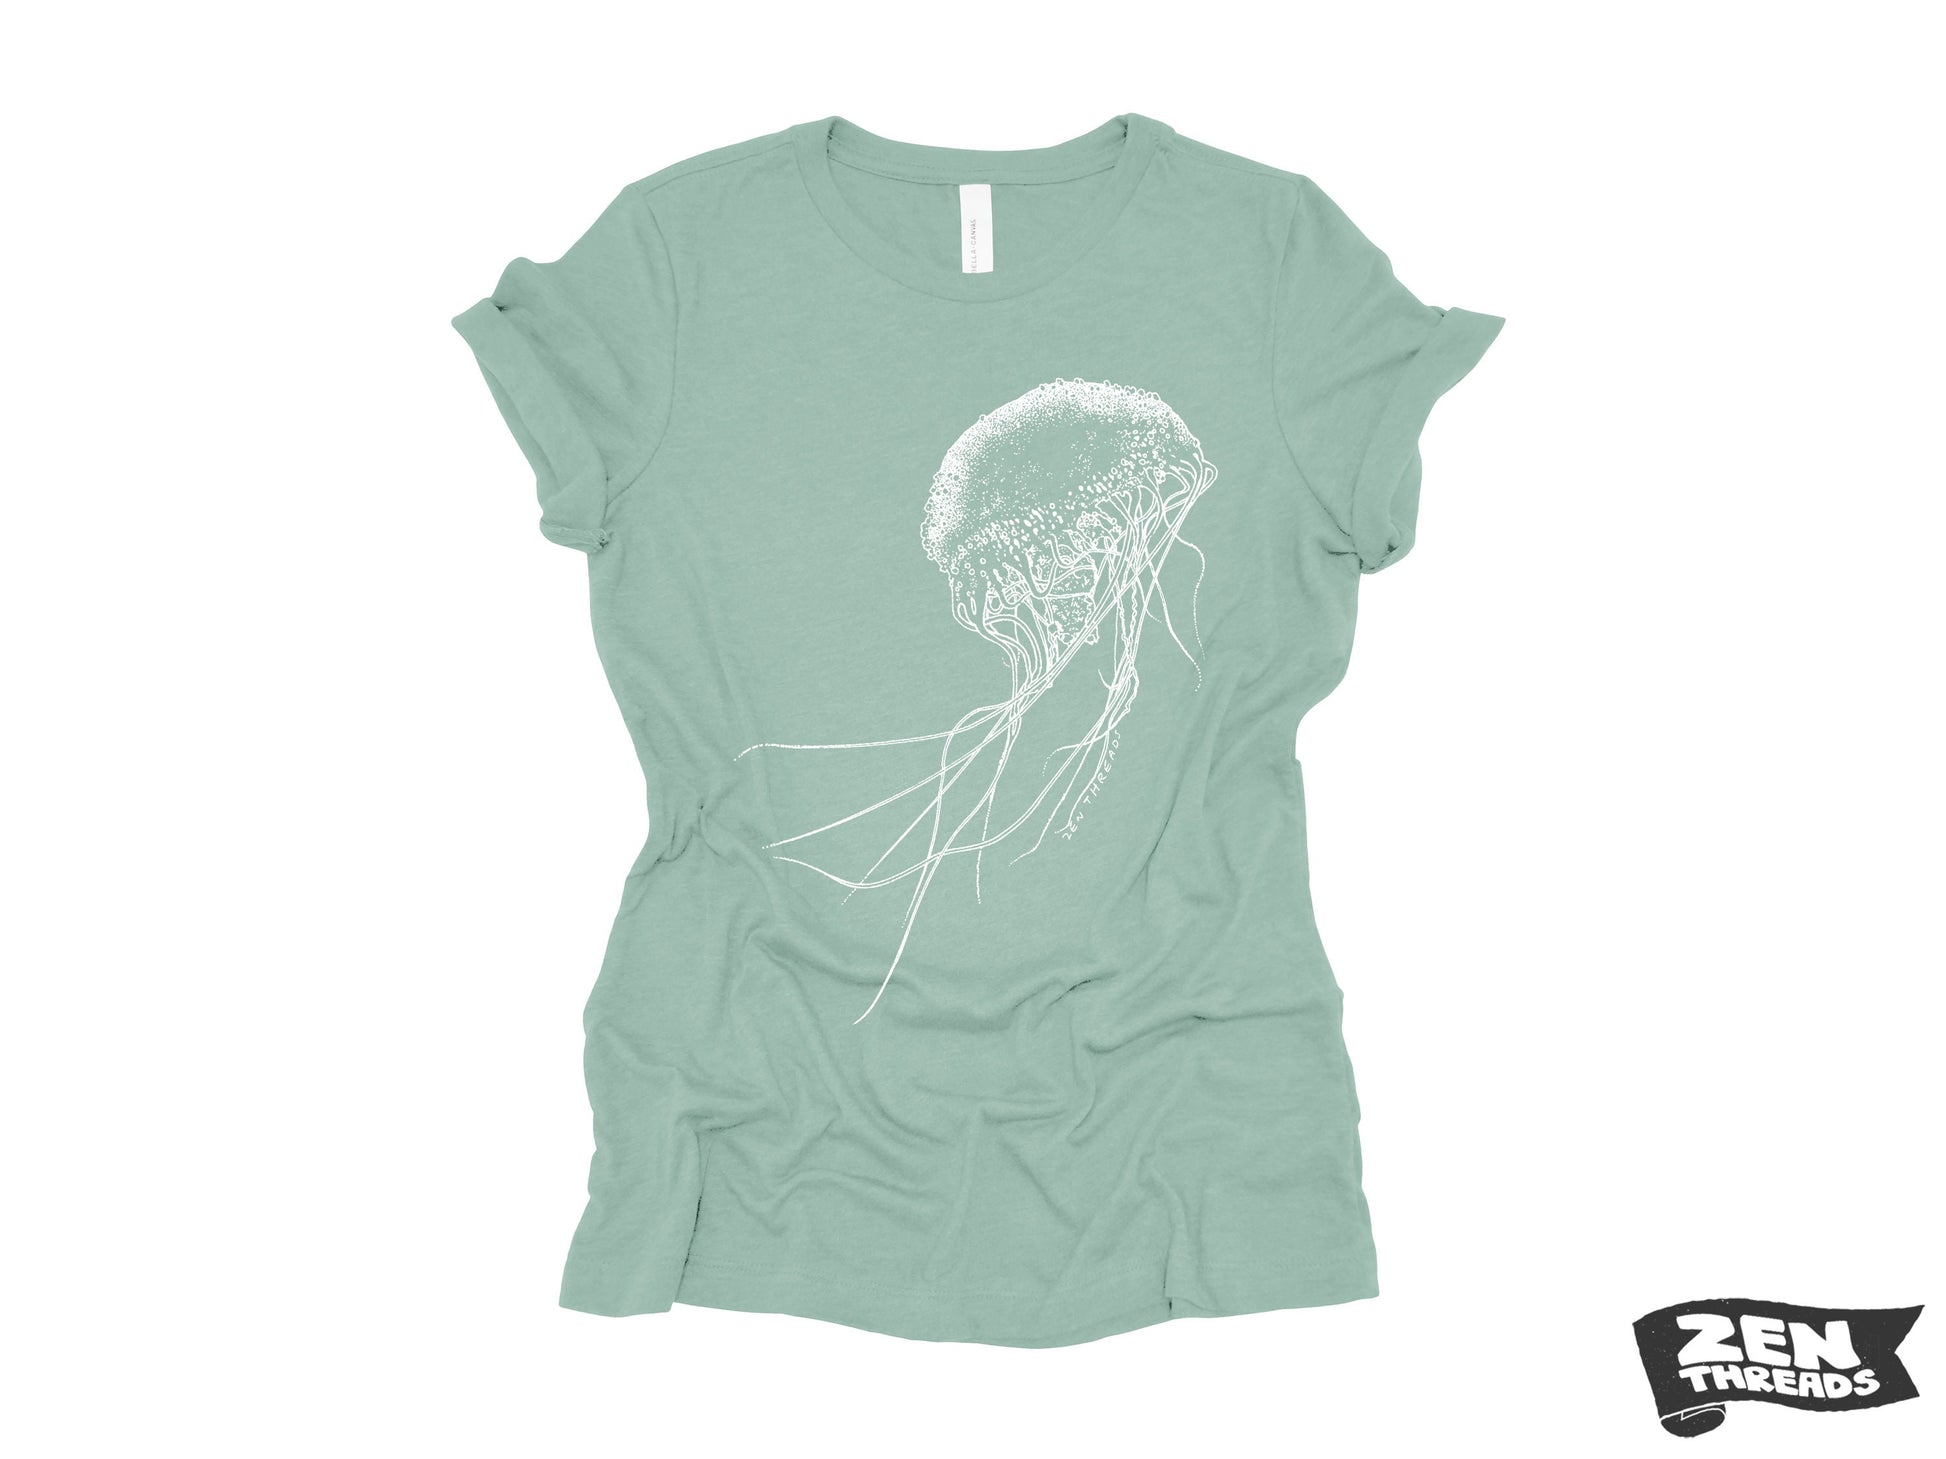 Womens JELLYFISH printed tee t-shirt (+ Colors Available) custom Bella Canvas relaxed fit ladies shirt squid ocean graphic jelly fish beach